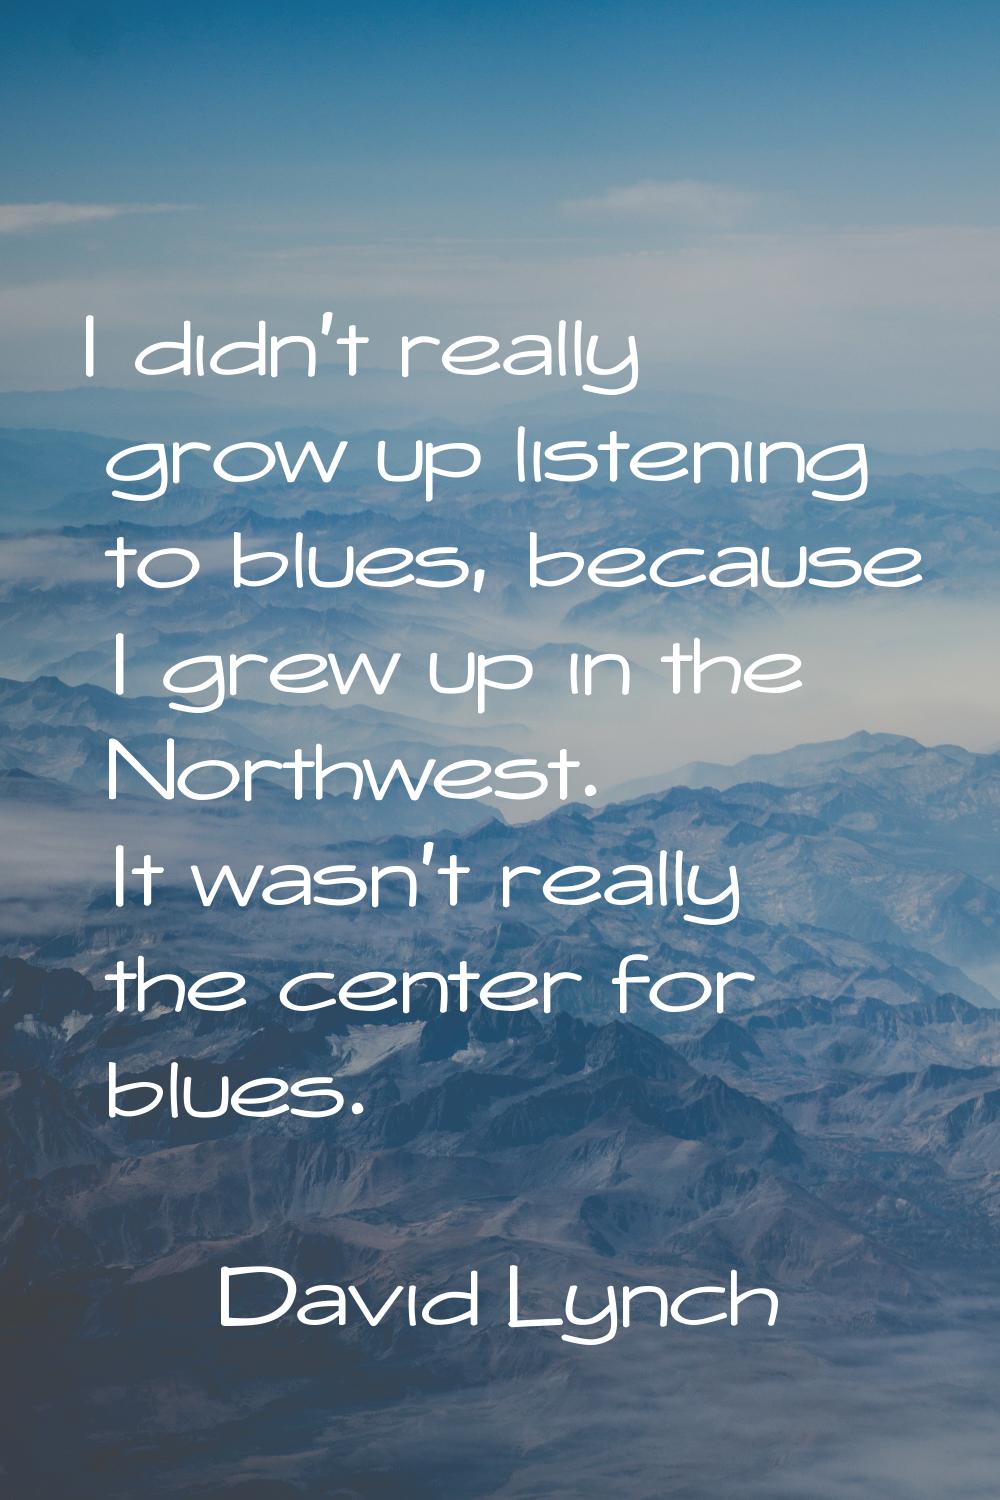 I didn't really grow up listening to blues, because I grew up in the Northwest. It wasn't really th